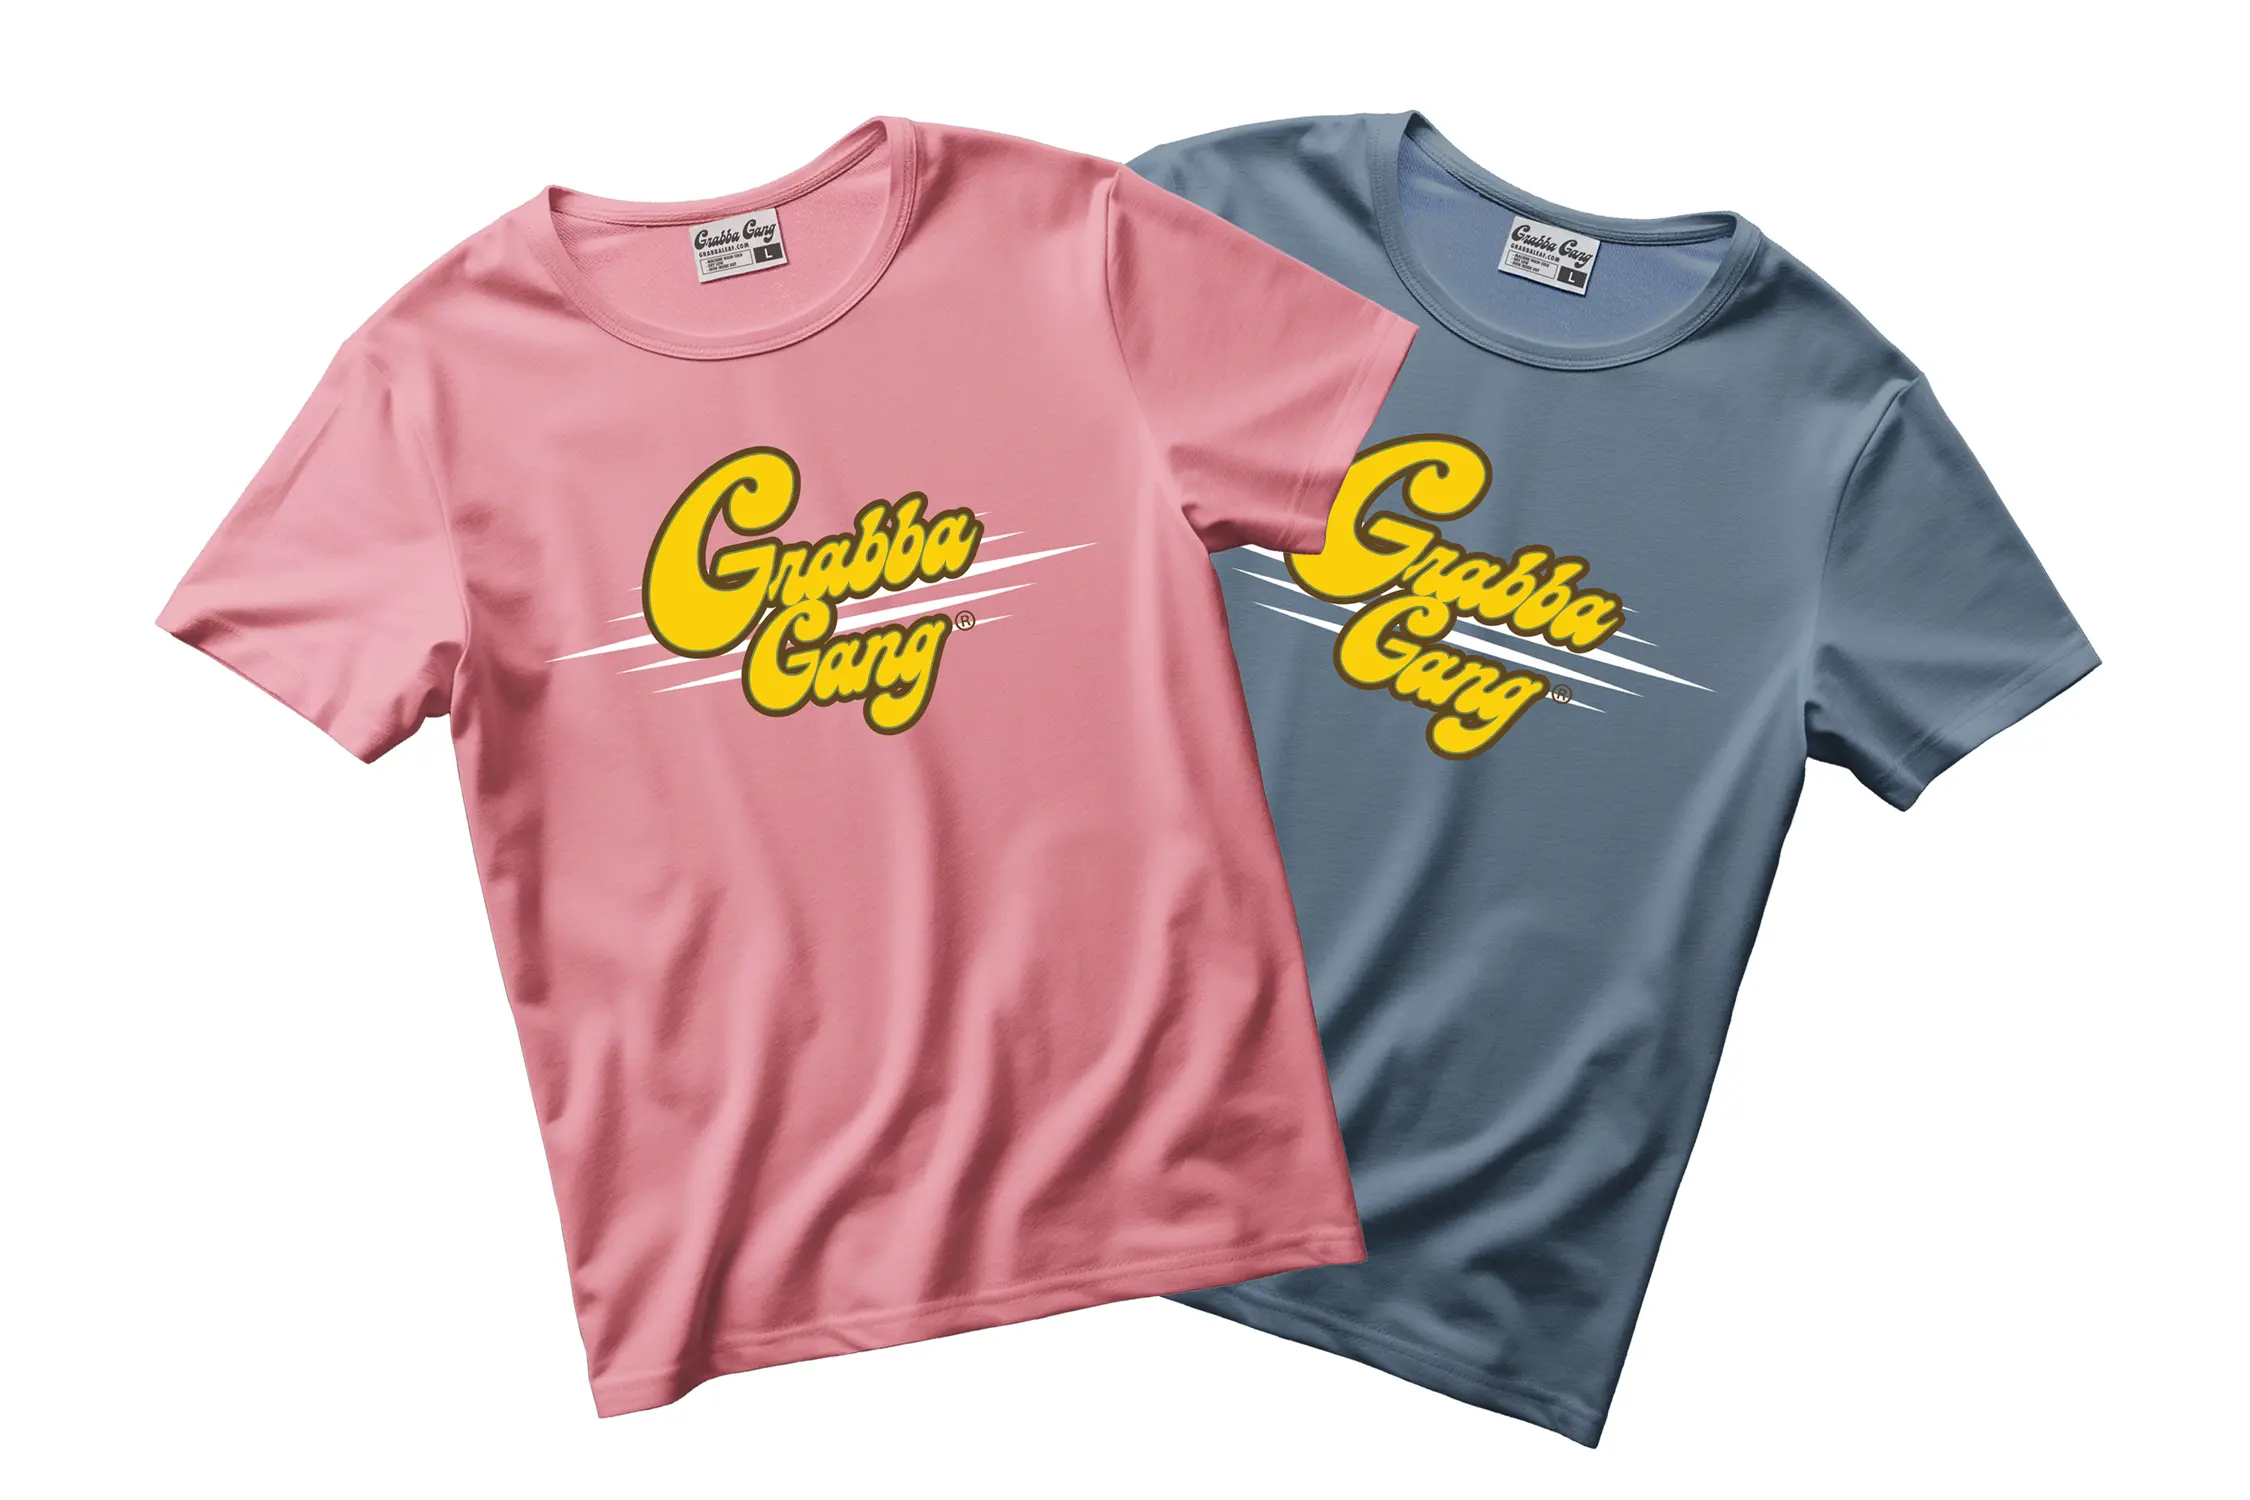 Grabba Gang T-Shirts in Blue and Pink featuring a relaxed fit and crew neck.